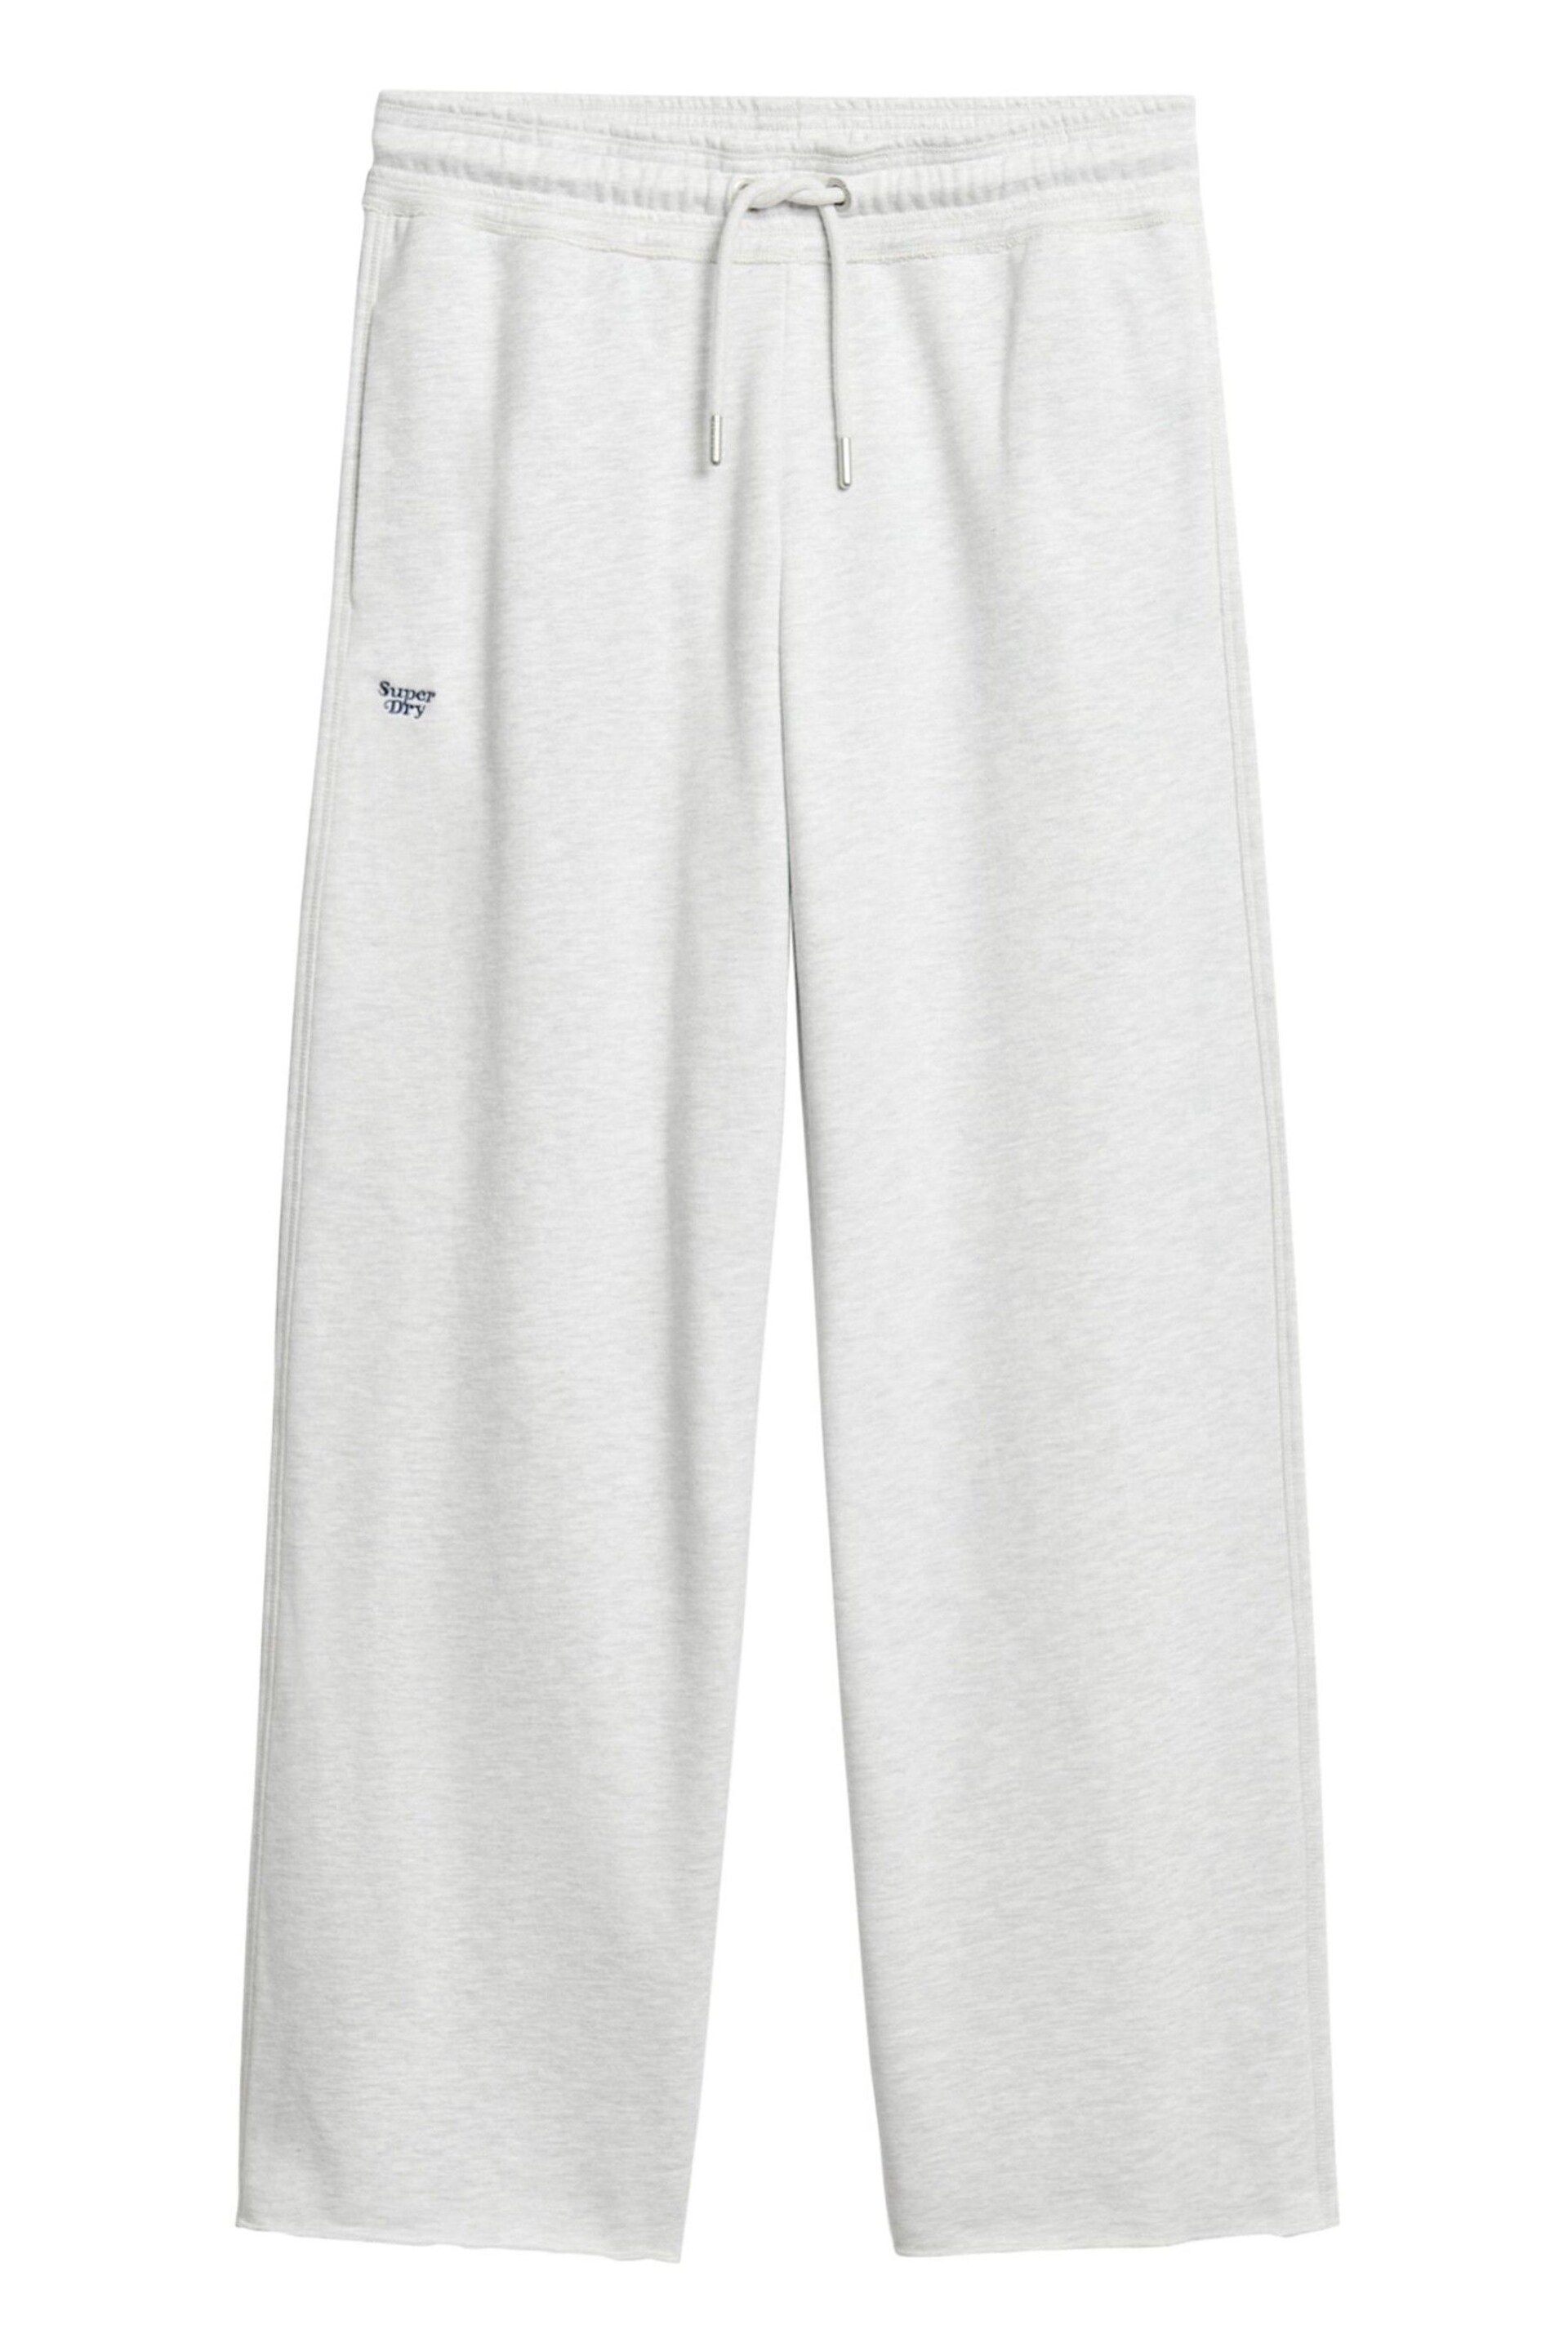 Superdry Grey Essential Logo Straight Joggers - Image 5 of 6